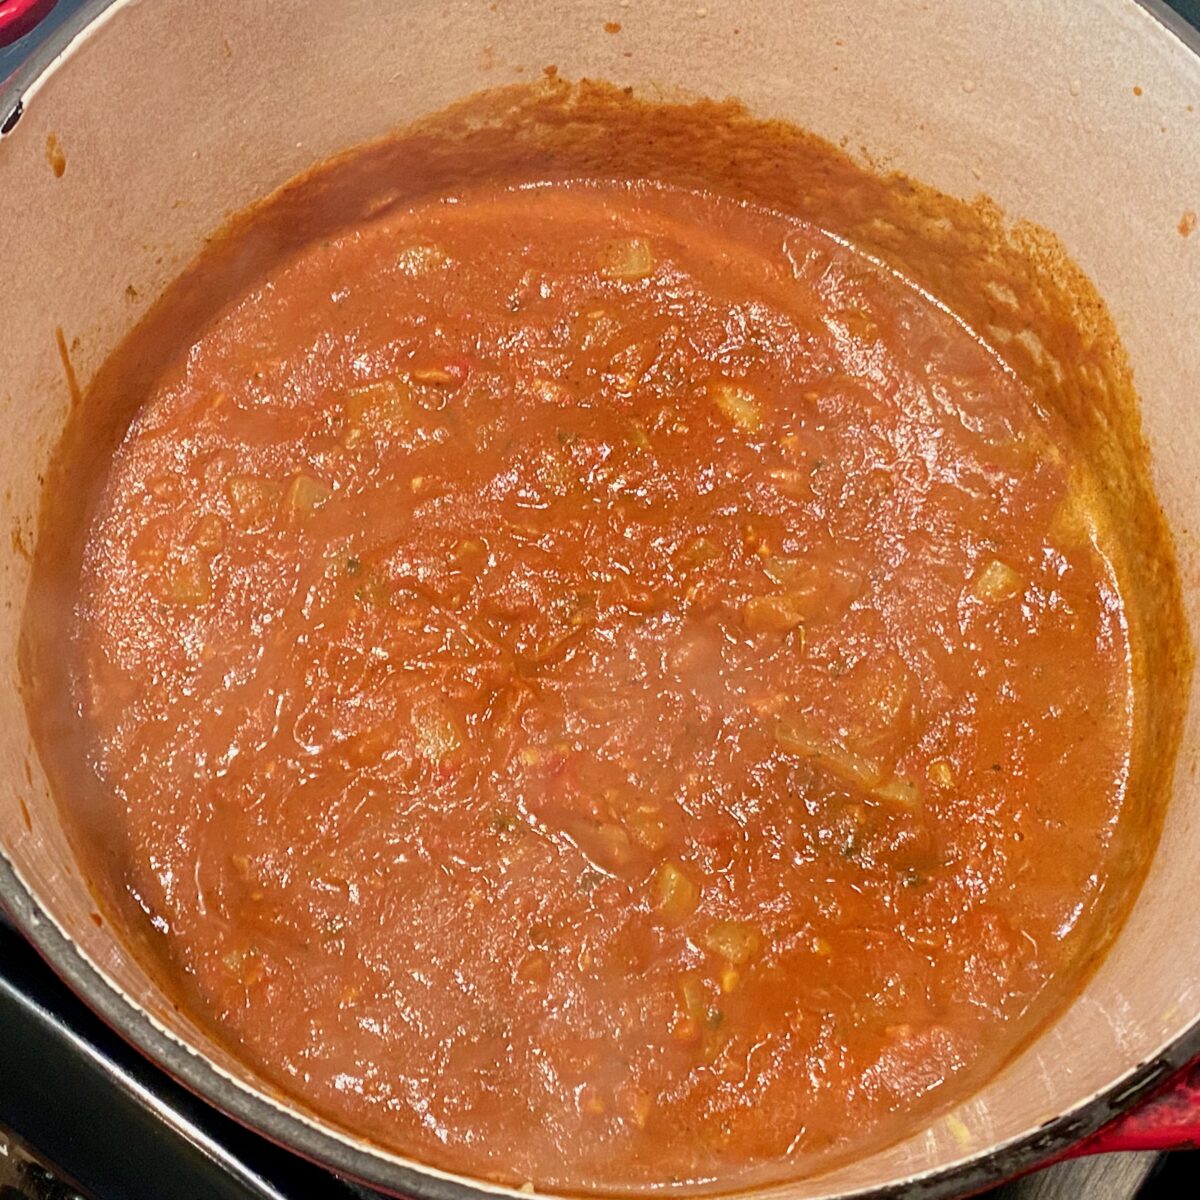 The chicken broth, water, tomato paste, sugar, and salt has now been added to the Dutch oven and whisked thoroughly to remove any lumps of tomato paste.